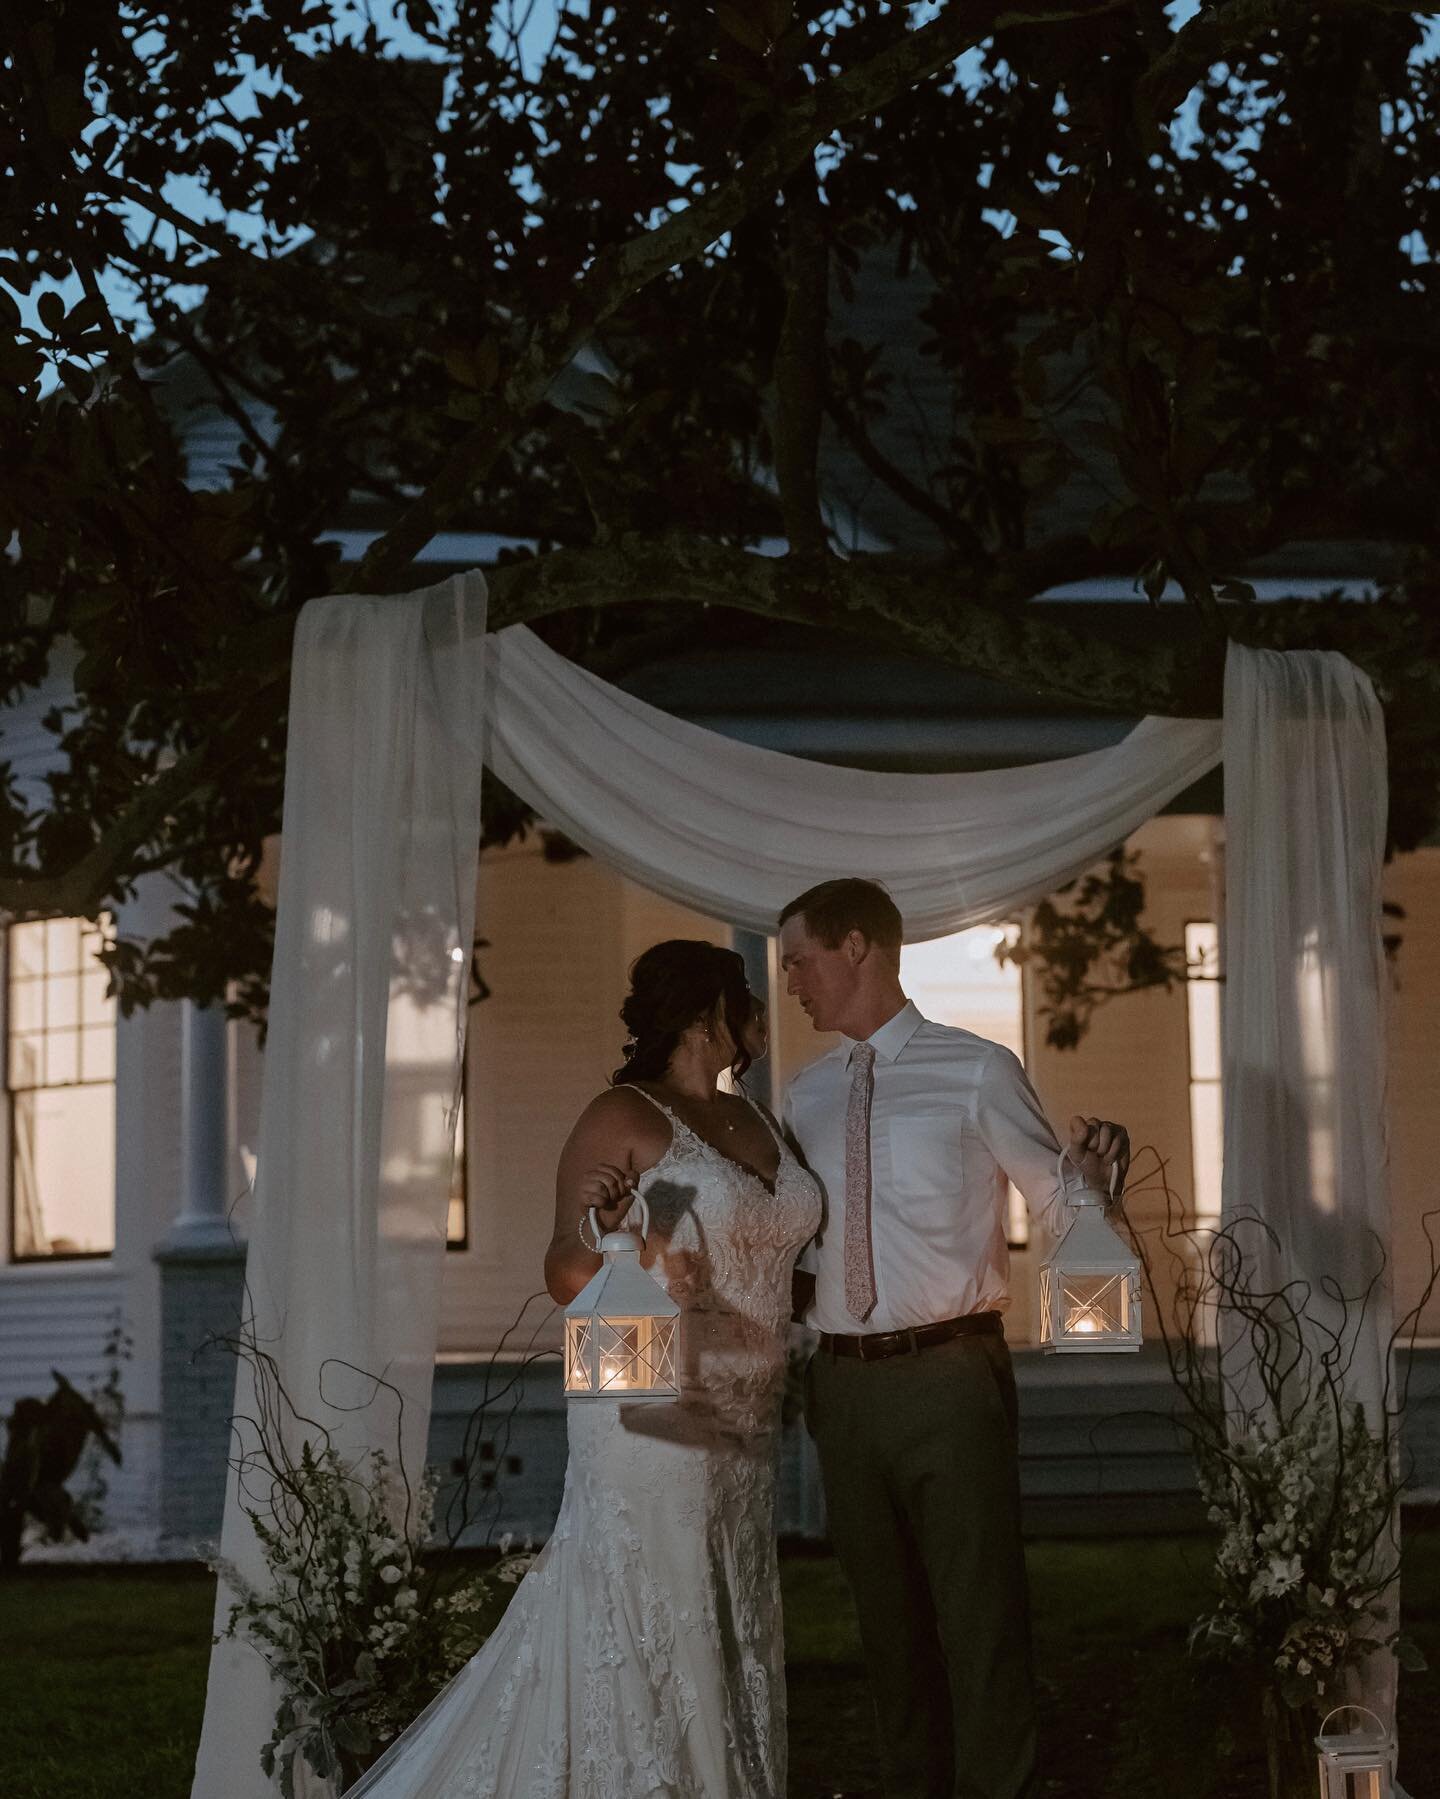 .
🌜Were discovering so many photo opportunities throughout the property!

Thanks to all the talented photographers that have been on site-
@annamariecreative caught such a romantic shot! 
.
🌙Even at the blue hour as Anna called it, that NC blue sky